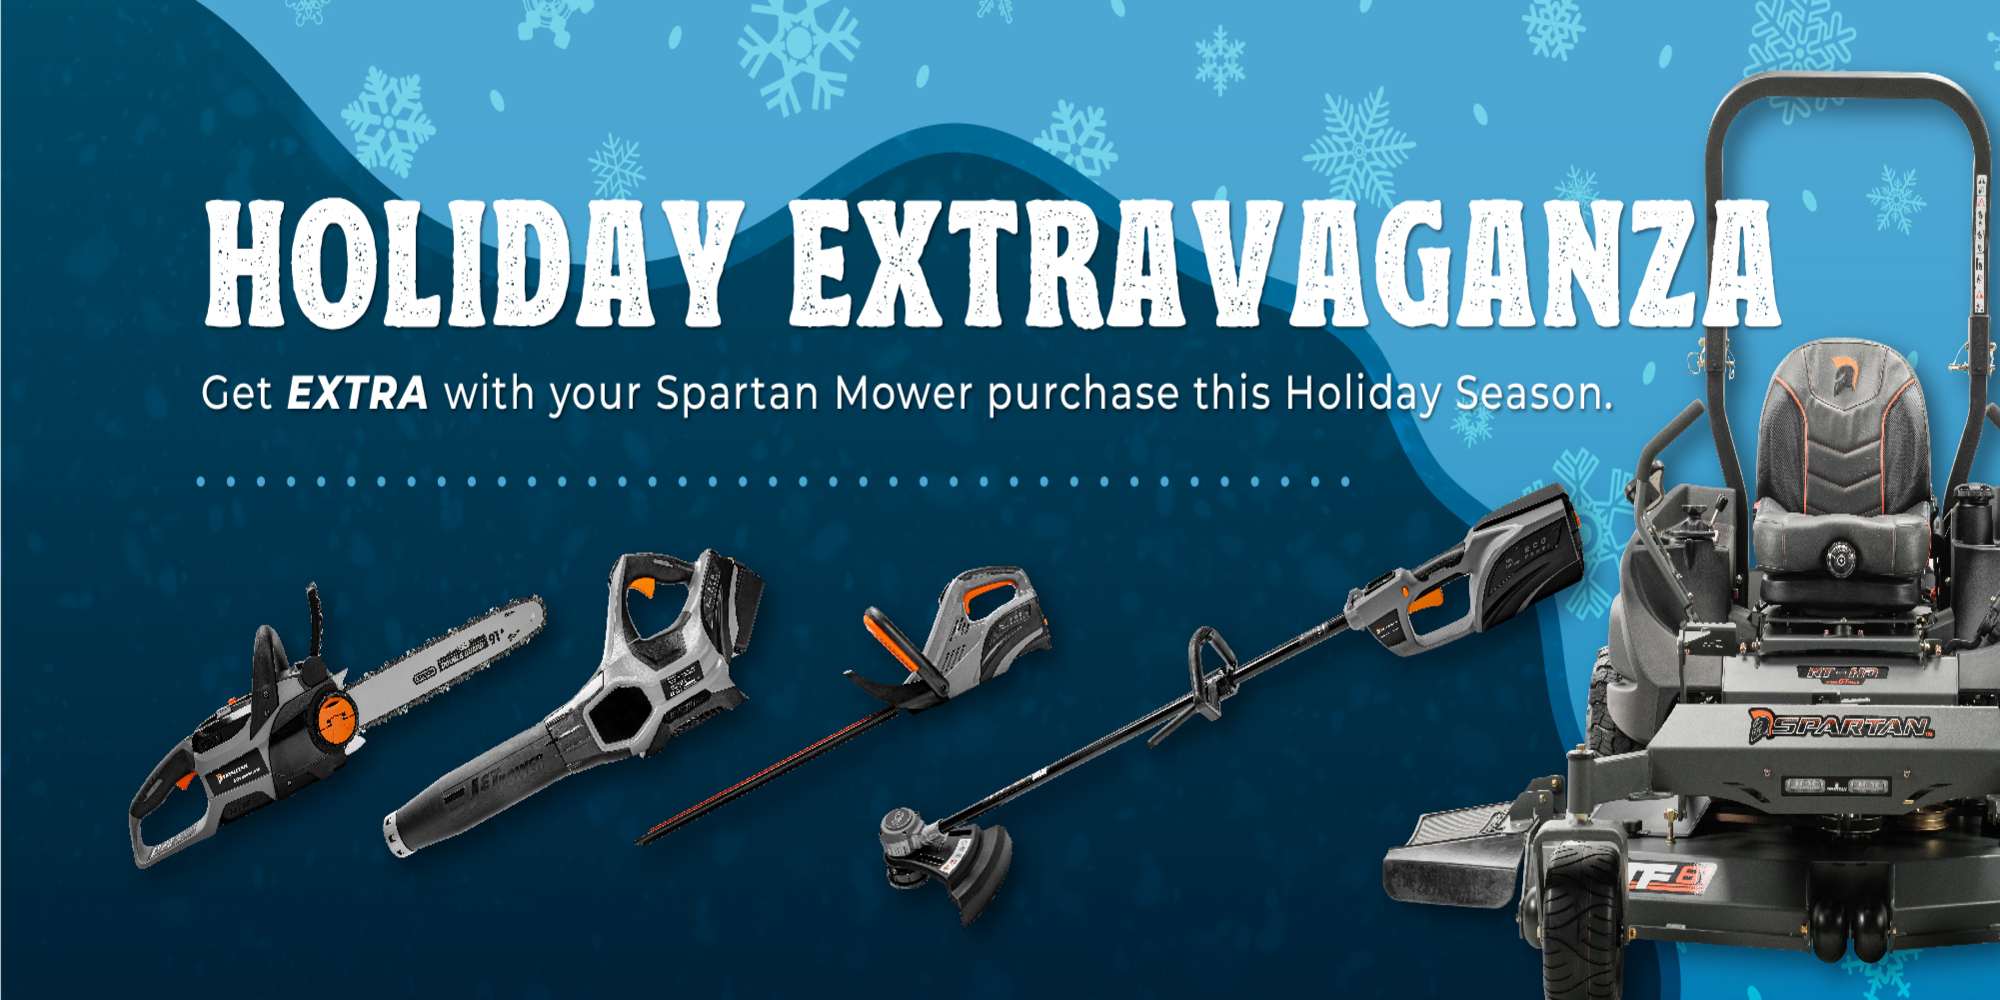 Holiday Extravaganza Offer Ends Dec. 31st 2023